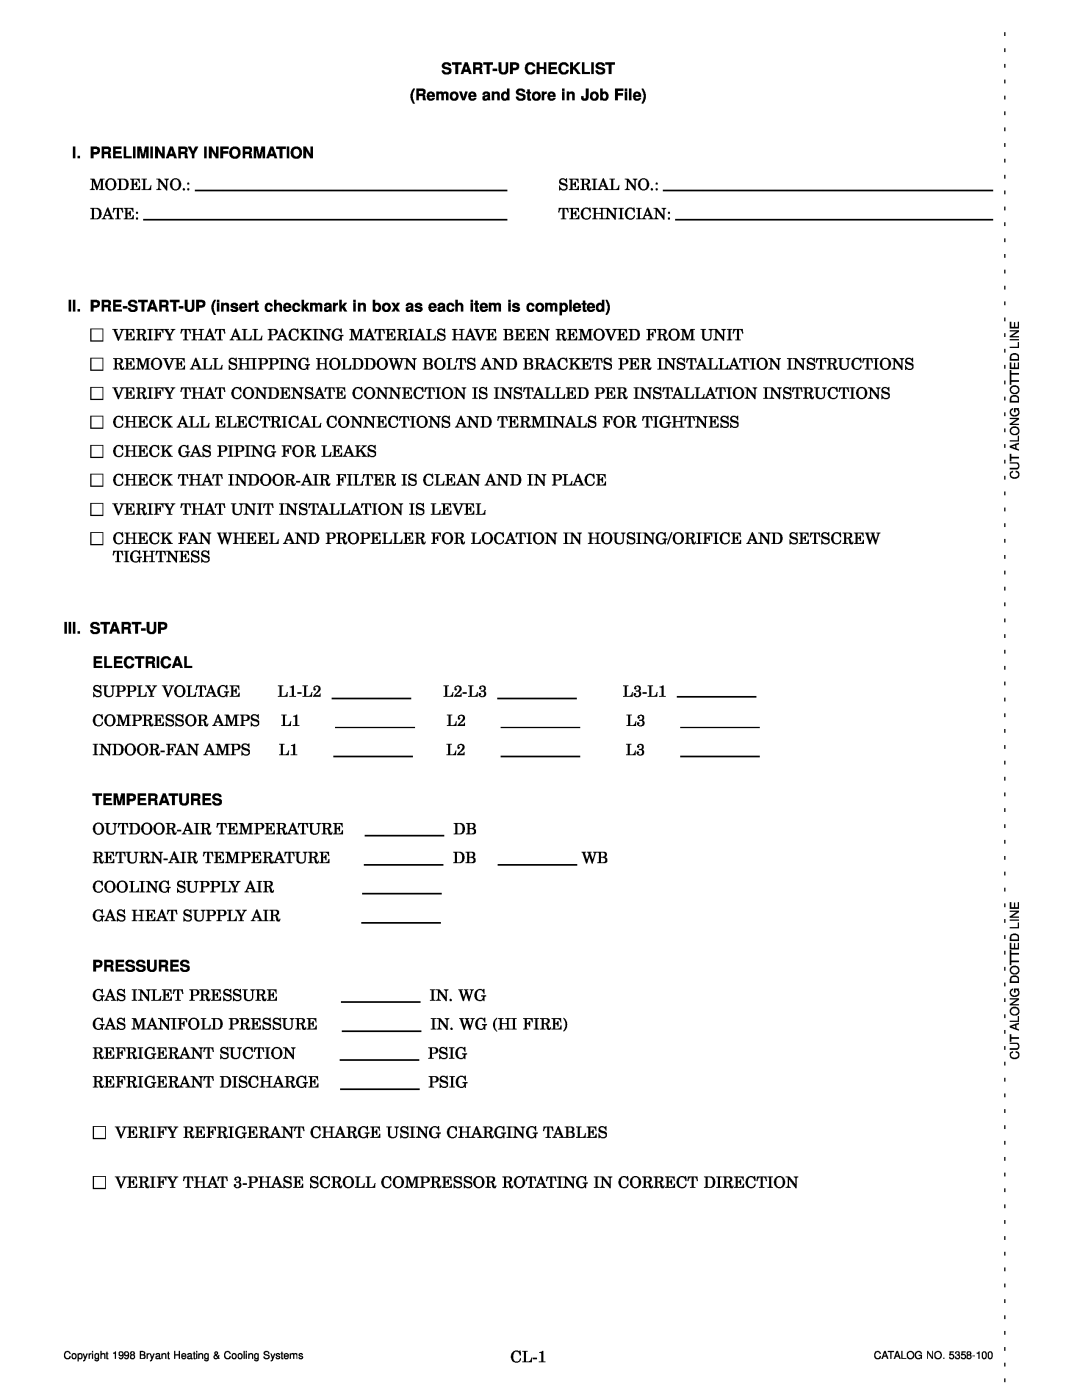 Bryant 581B Start-Upchecklist, Remove and Store in Job File, I. Preliminary Information, Iii. Start-Up, Electrical, Date 